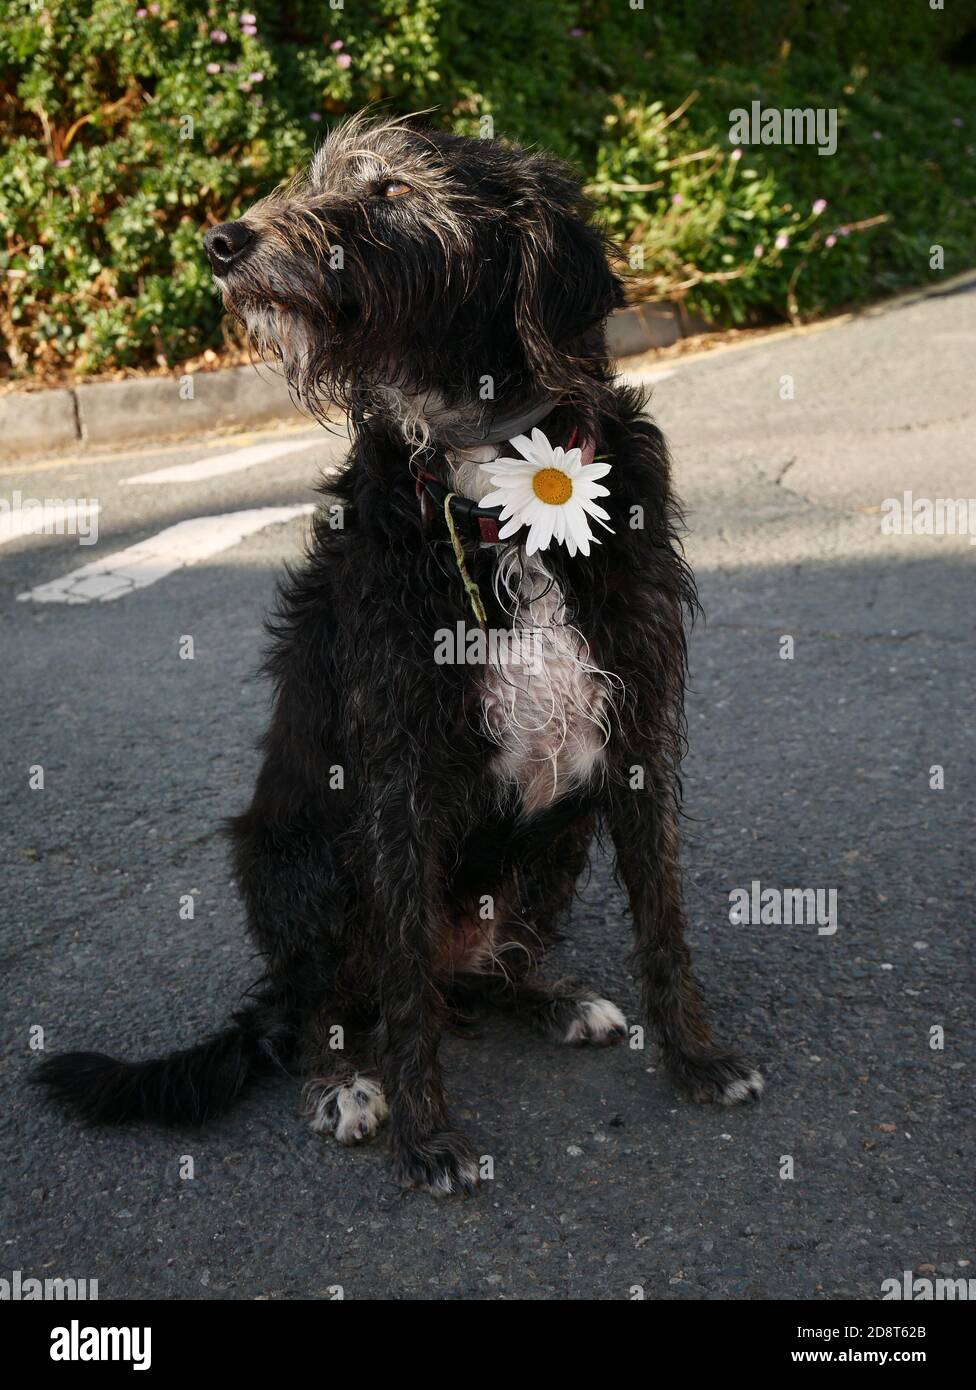 Scruffy dog dressed up with a flower portrait. Stock Photo